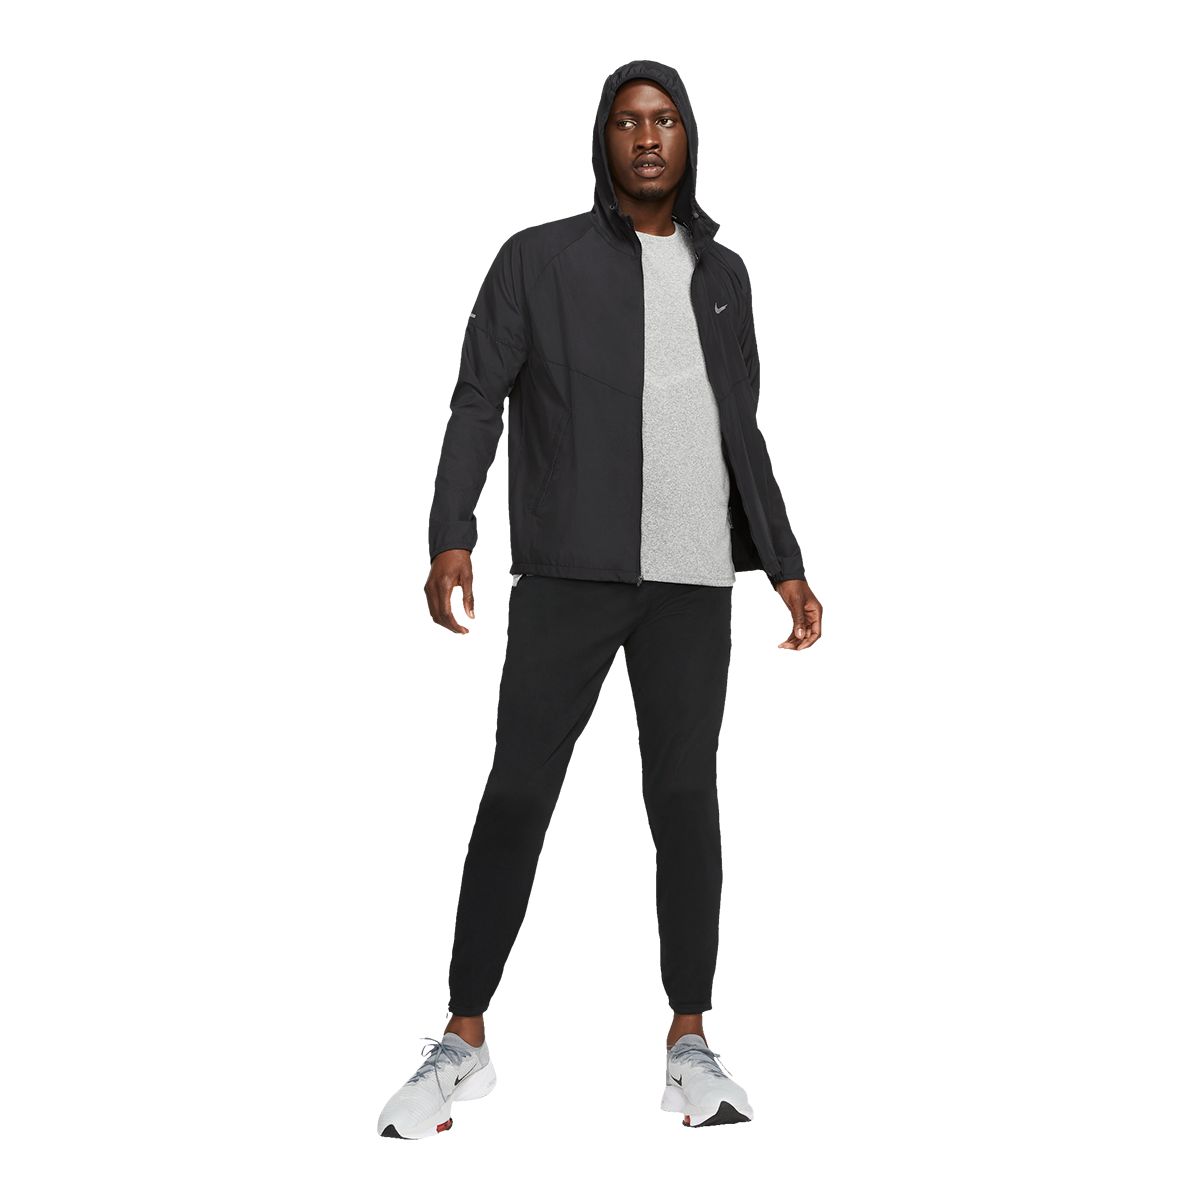 https://media-www.sportchek.ca/product/div-03-softgoods/dpt-70-athletic-clothing/sdpt-01-mens/333624550/nike-challenger-knit-run-pant-q122--3e63e18e-14f1-4198-8346-1a5200ee8fed-jpgrendition.jpg?imdensity=1&imwidth=1244&impolicy=mZoom